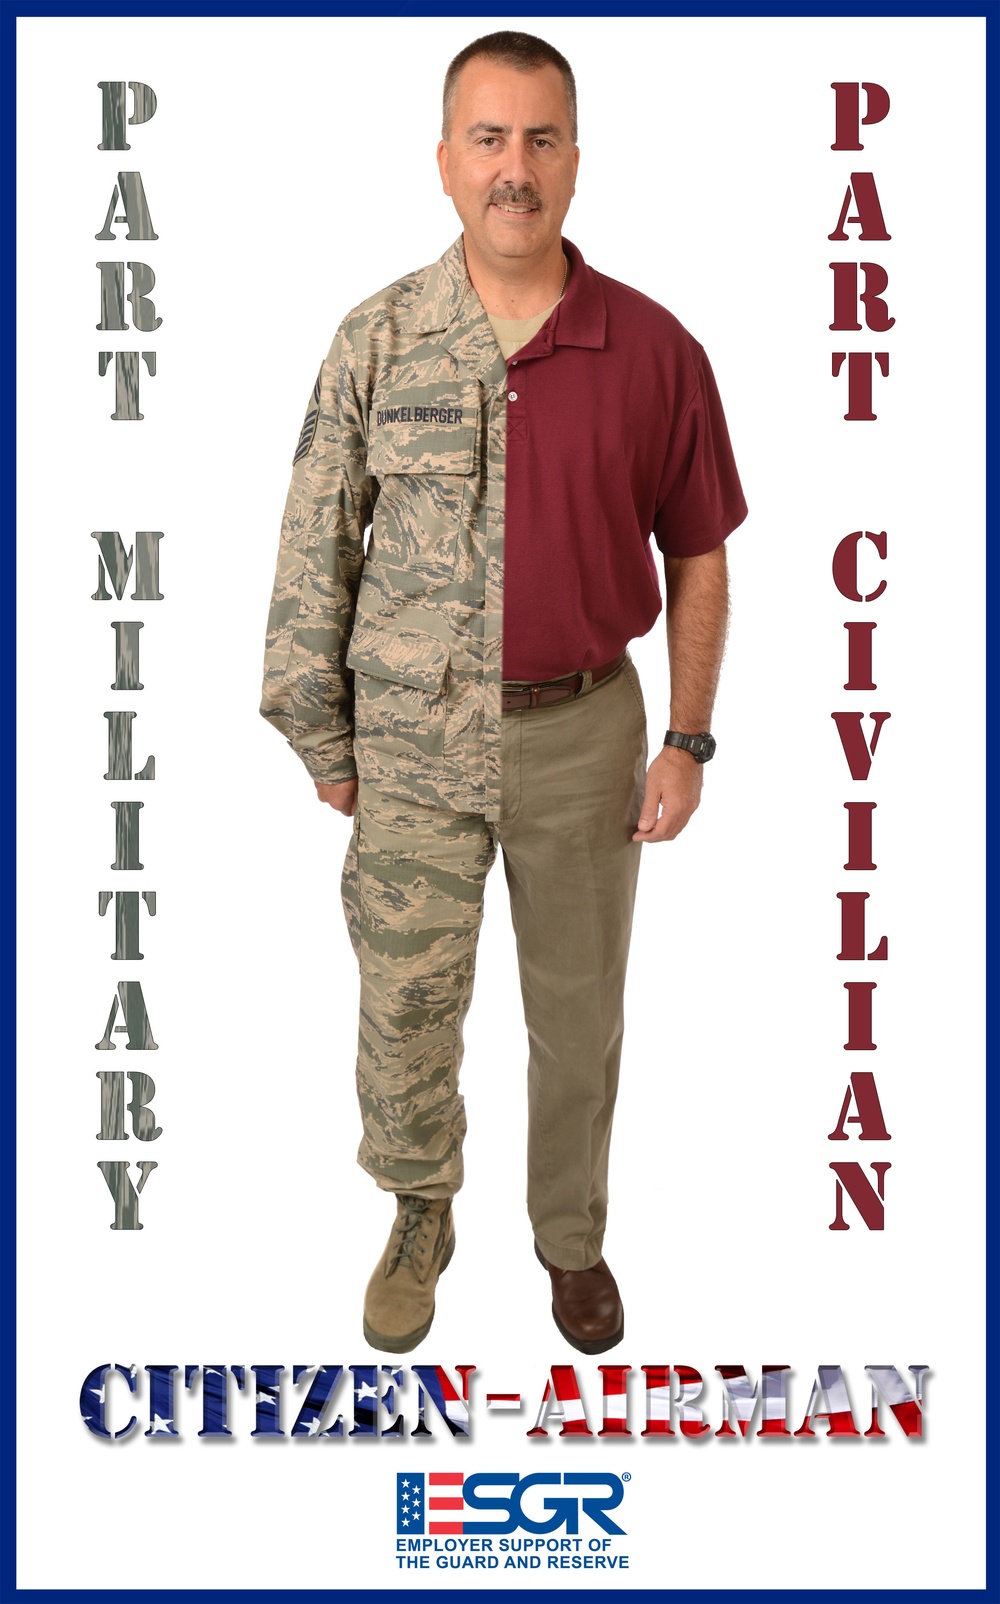 Citizen-Airman knows the importance of employer support